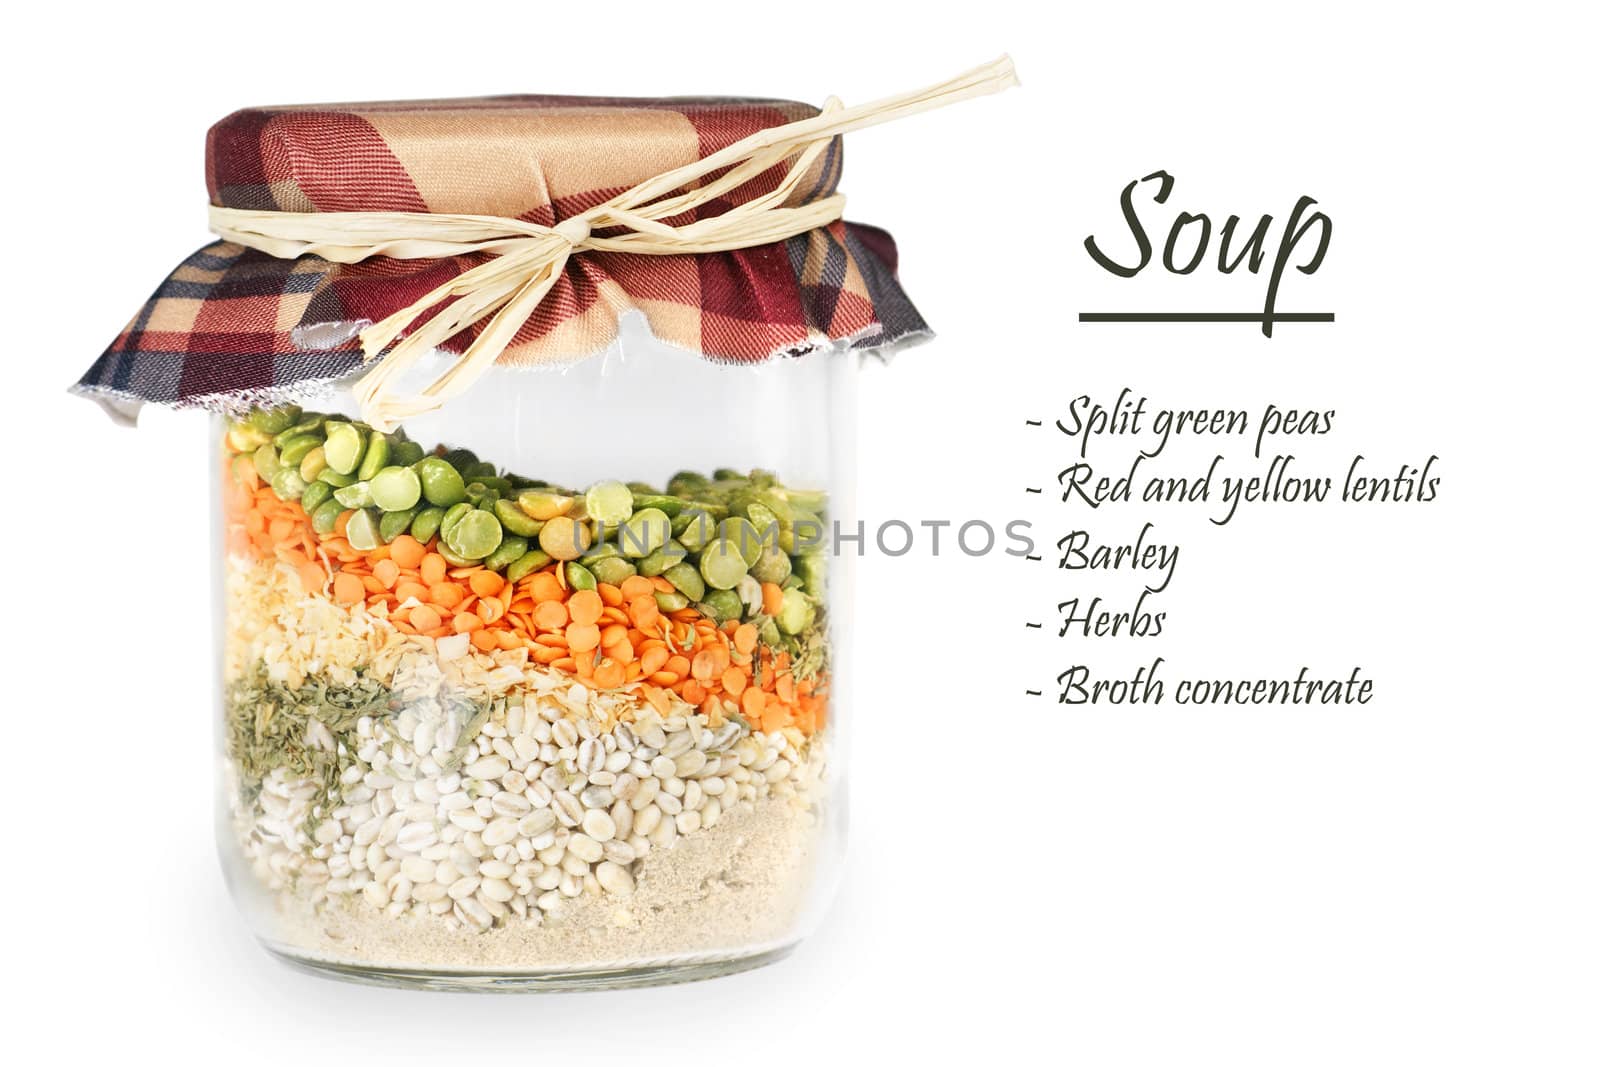 Homemade soup mix by Mirage3